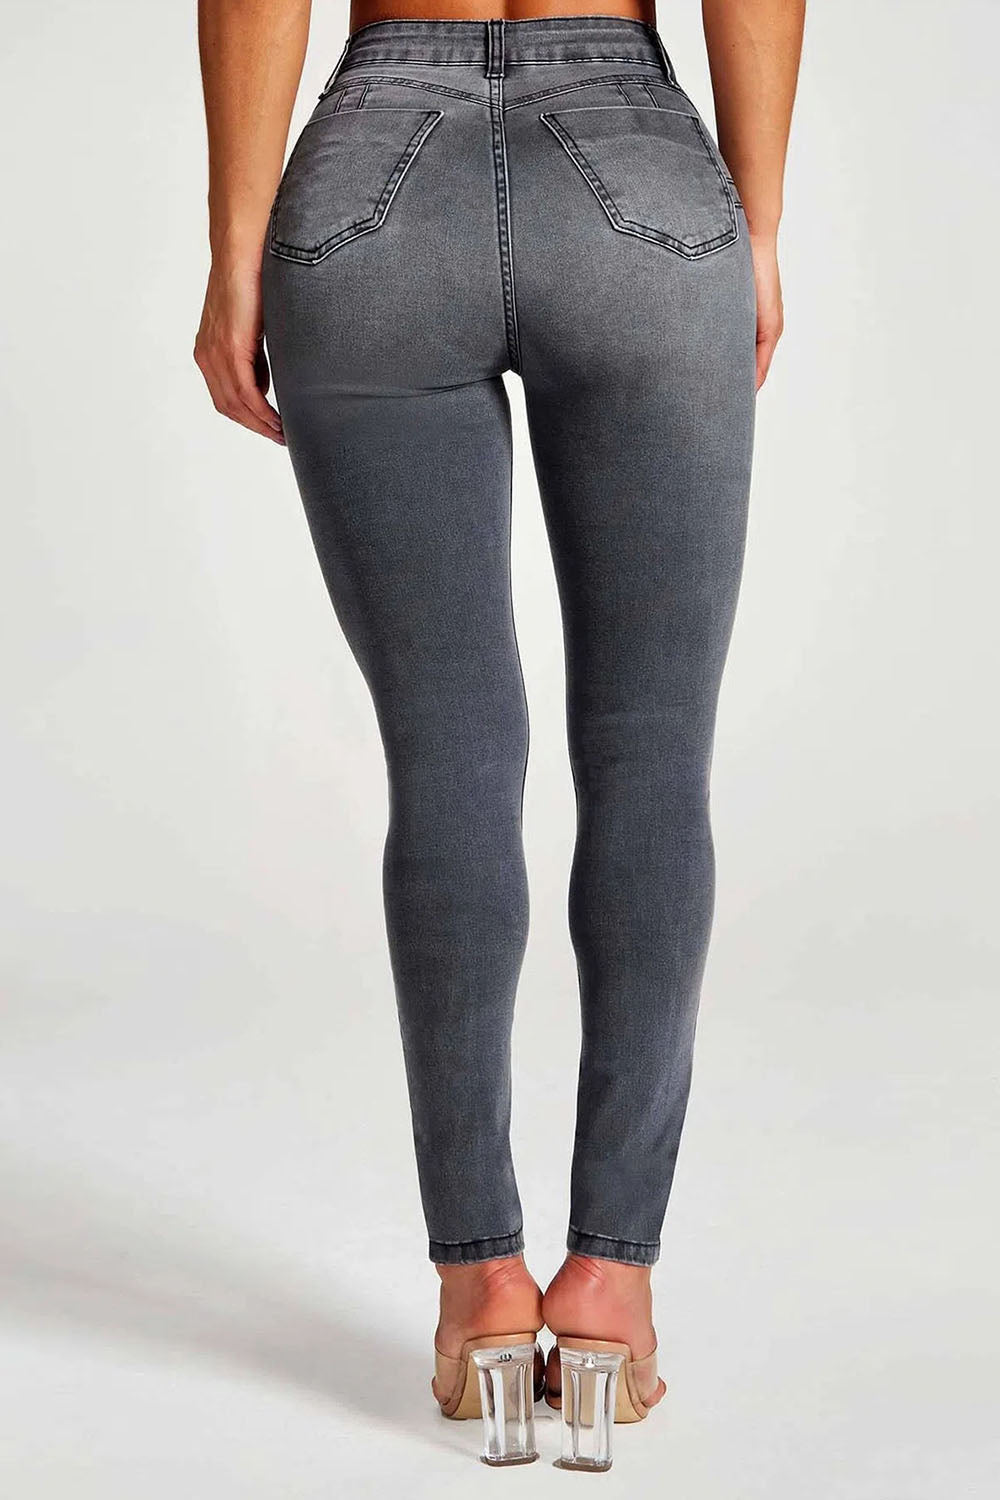 Buttoned Skinny Jeans - Bottoms - Pants - 2 - 2024